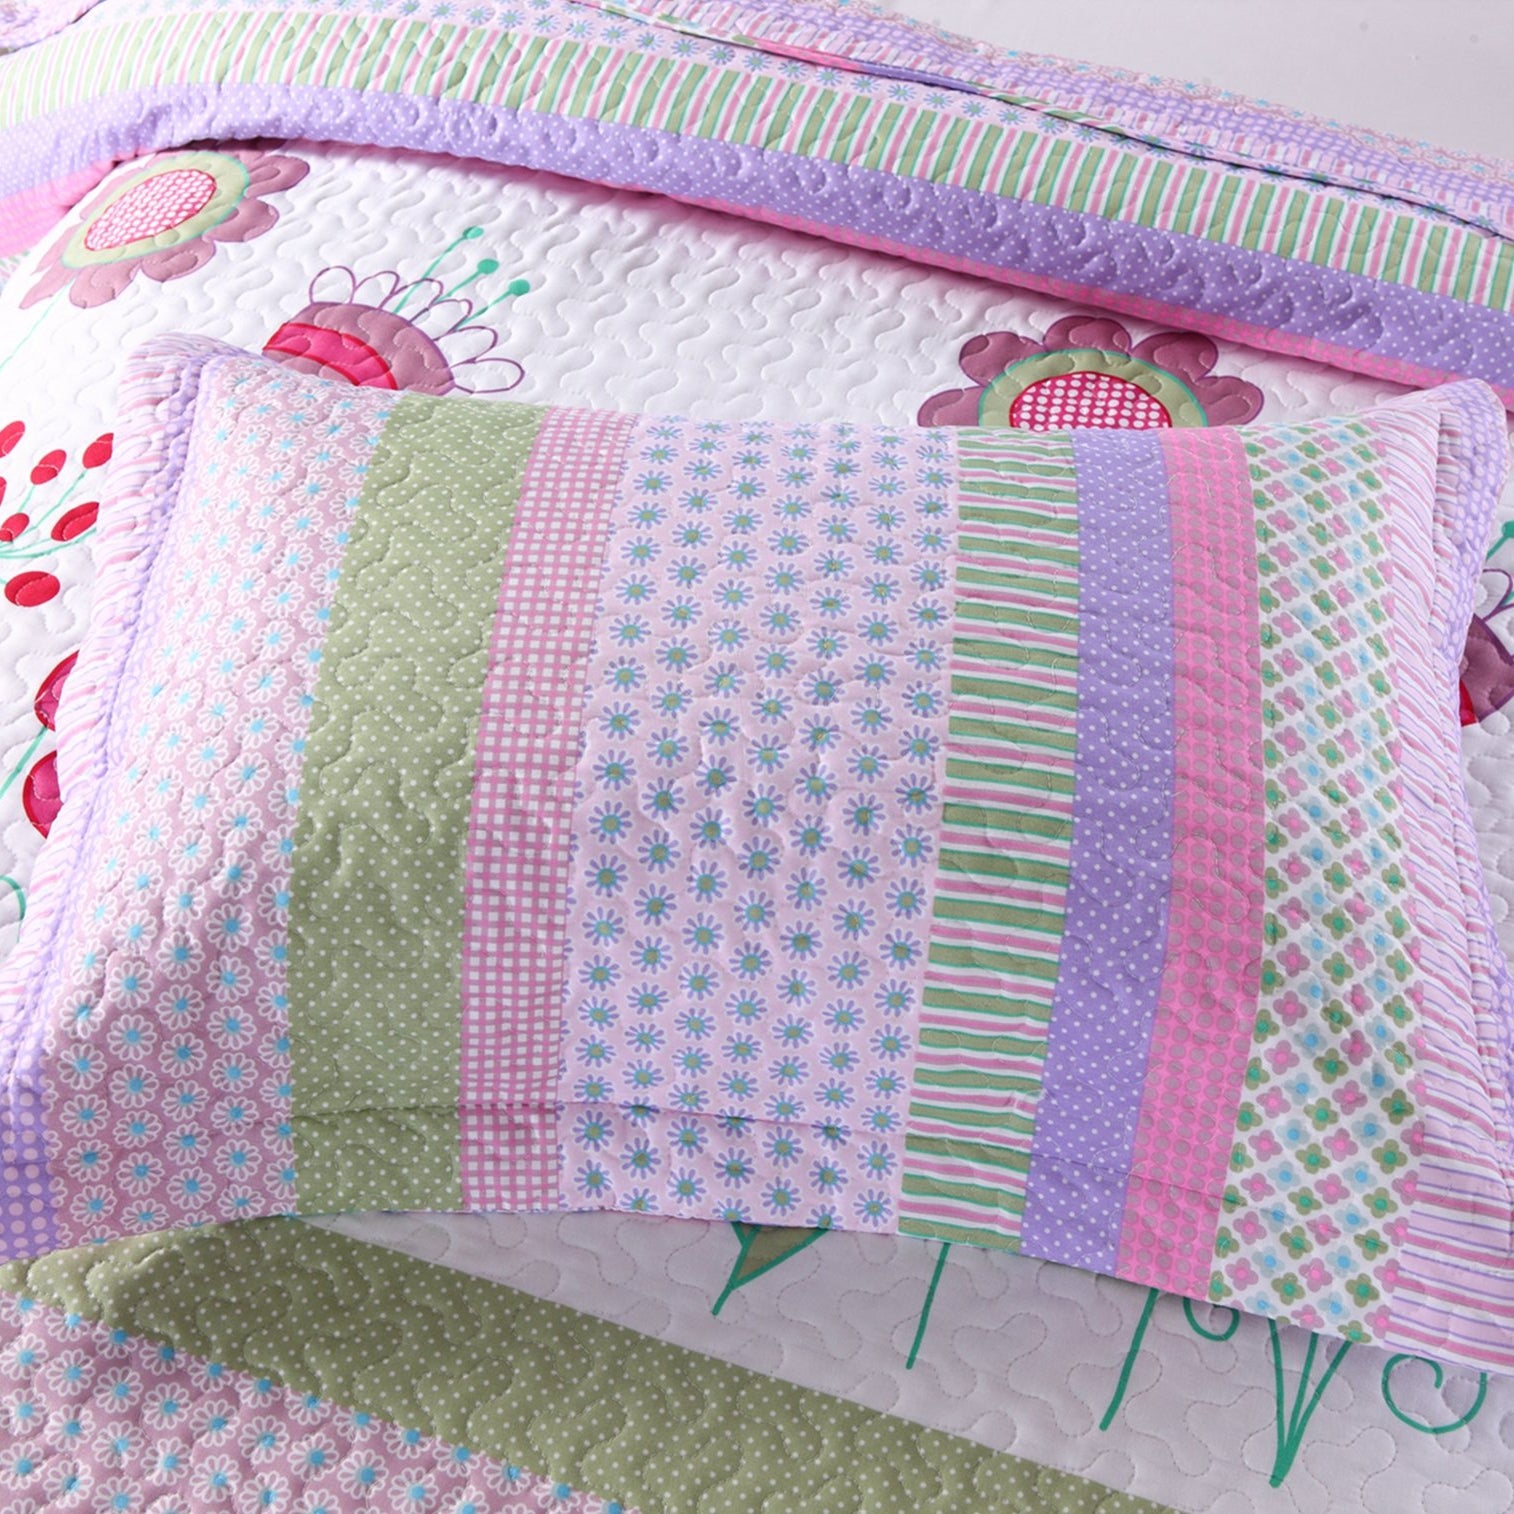 2/3 Piece Kids Bedspread Quilts Set Throw Blanket for Girls A14